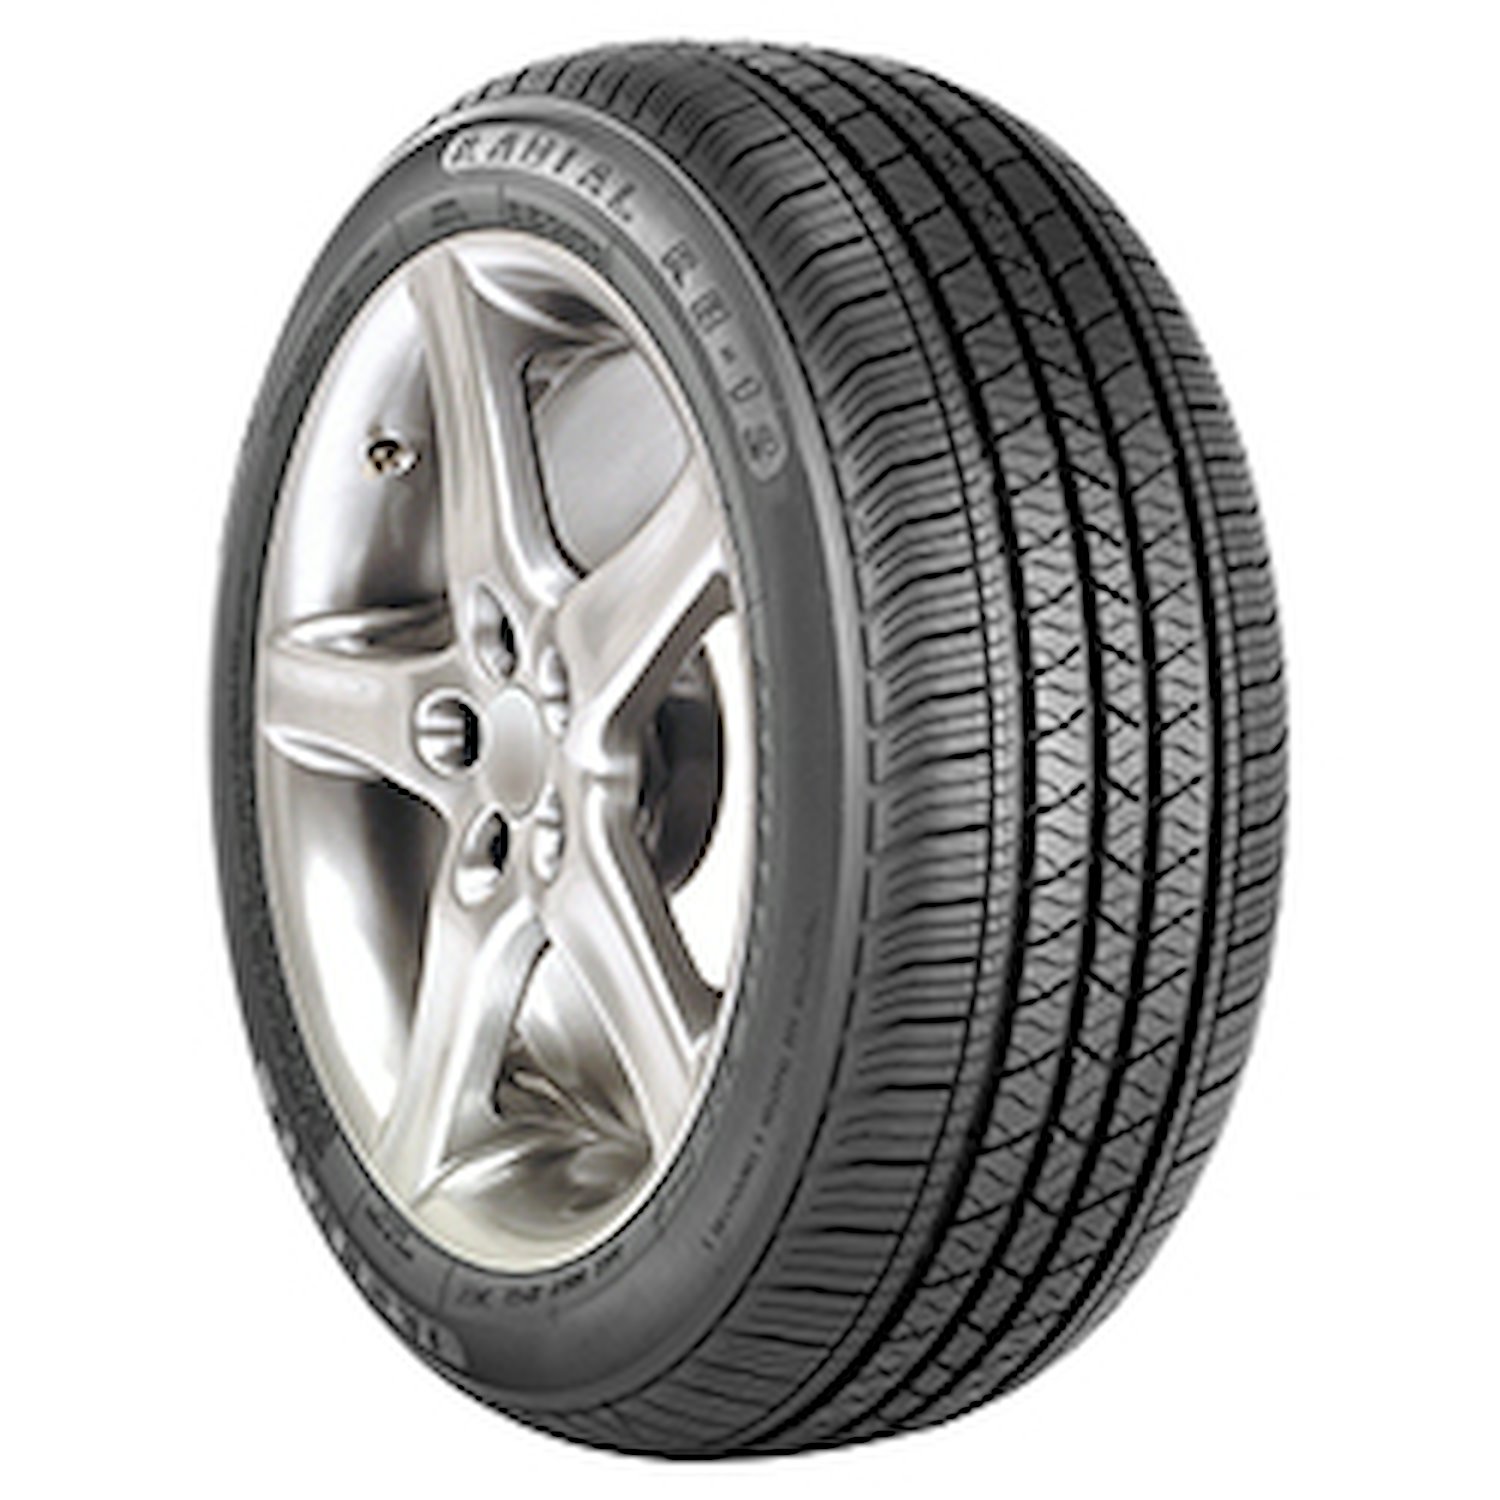 RB-12 Tire, 175/70R14 84T